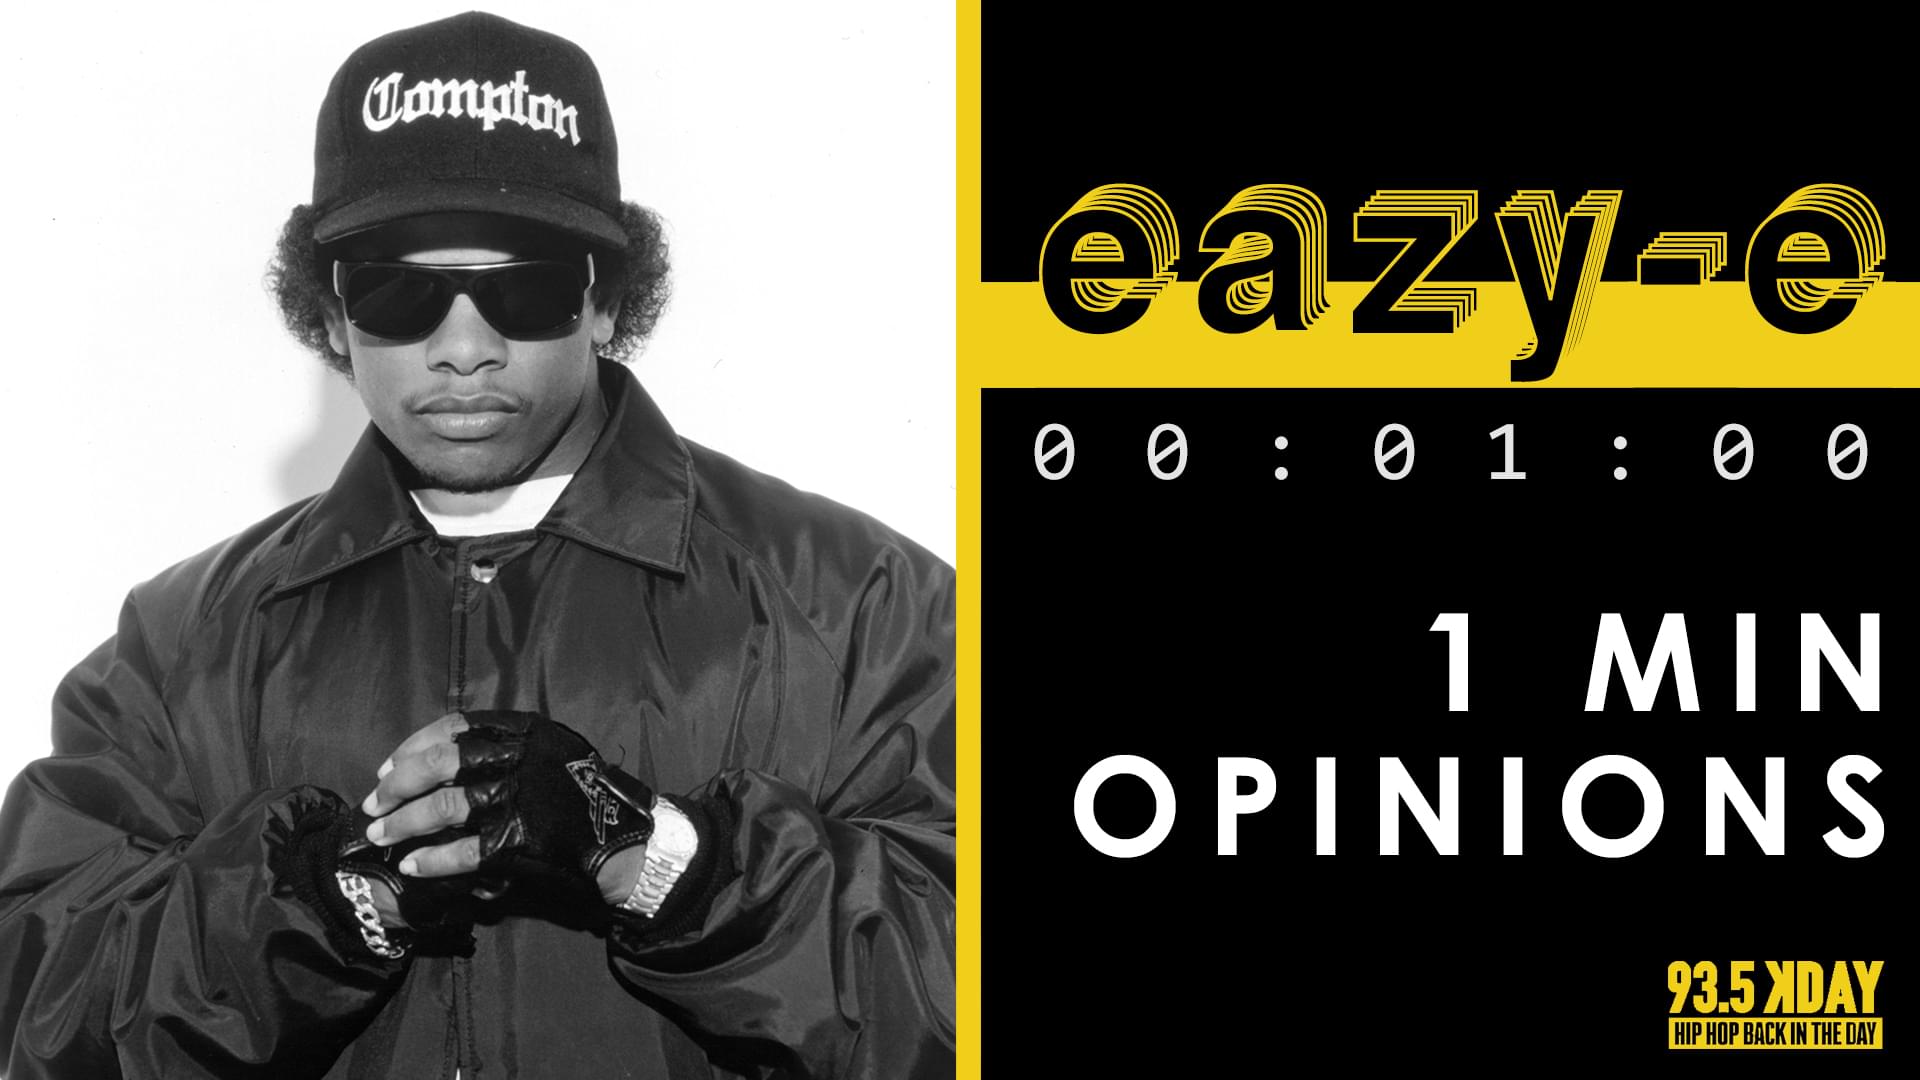 935 KDAY DJ's Share Their '1 Minute Opinions' On The Late Eazy-E [WATCH]